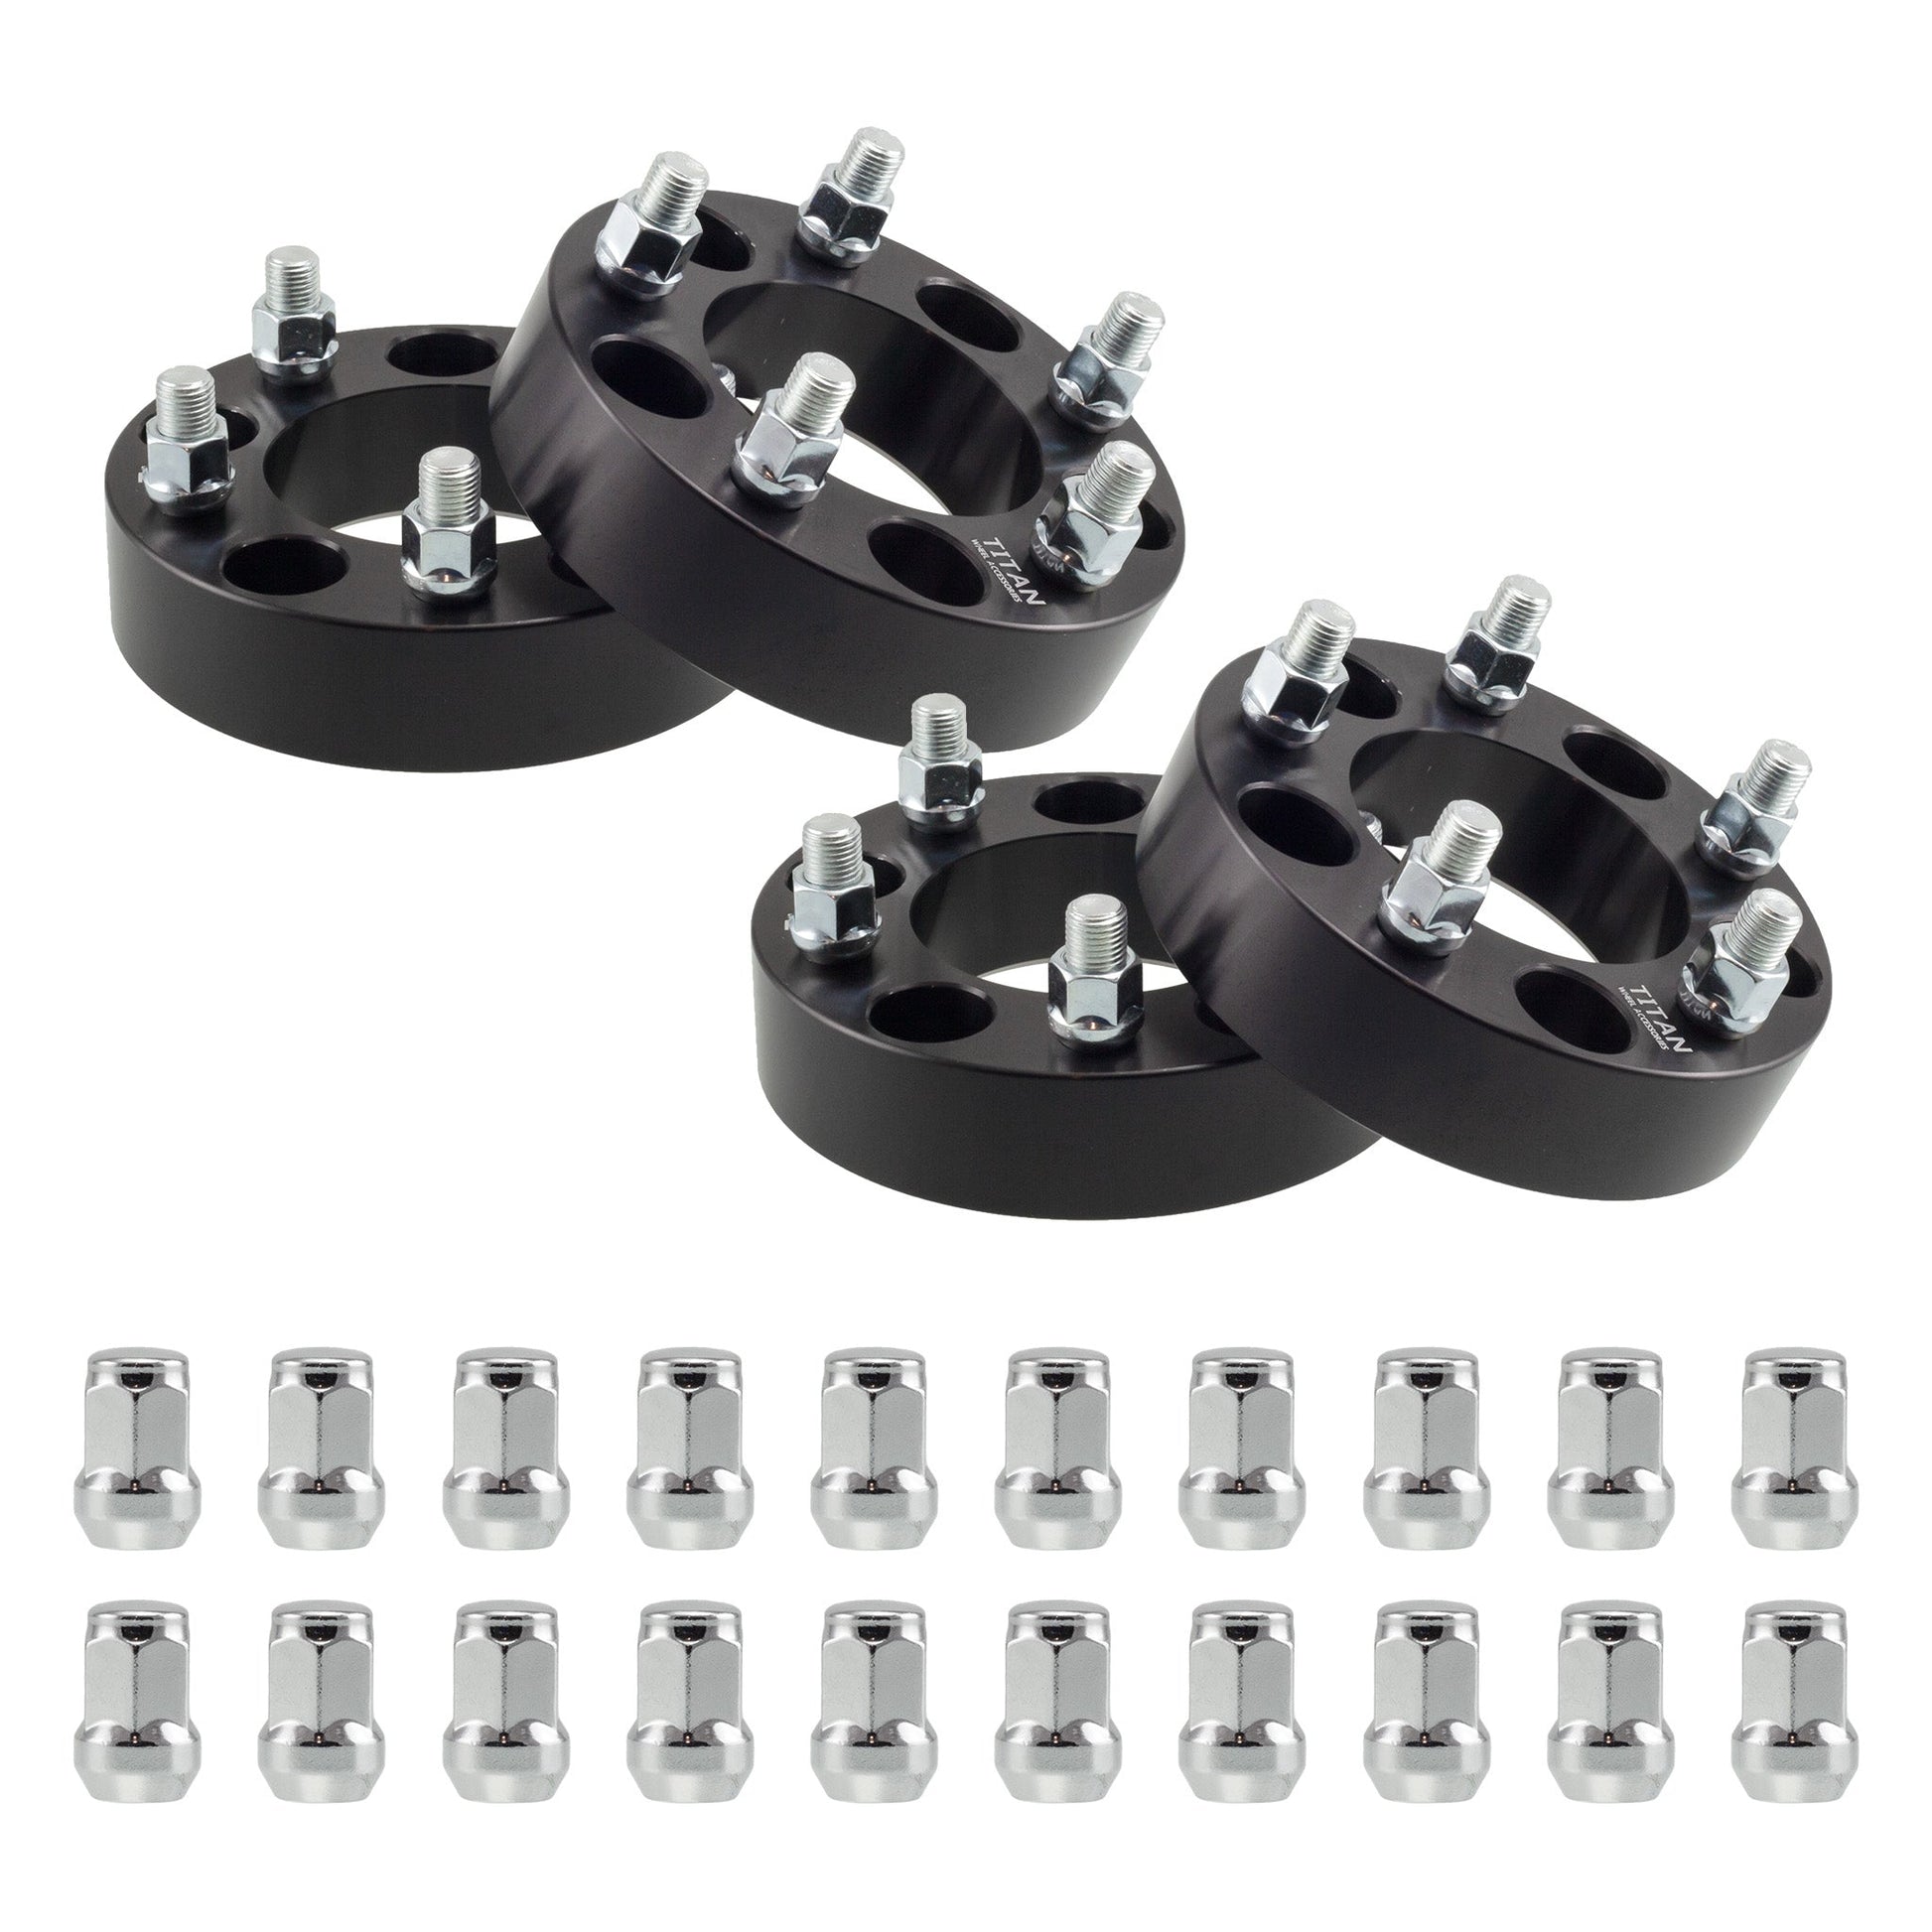 1" (25mm) Titan Wheel Spacers for Chrysler 300 Dodge Challenger Charger | 5x4.5 | 71.5 Hubcentric |14x1.5 Studs | Titan Wheel Accessories